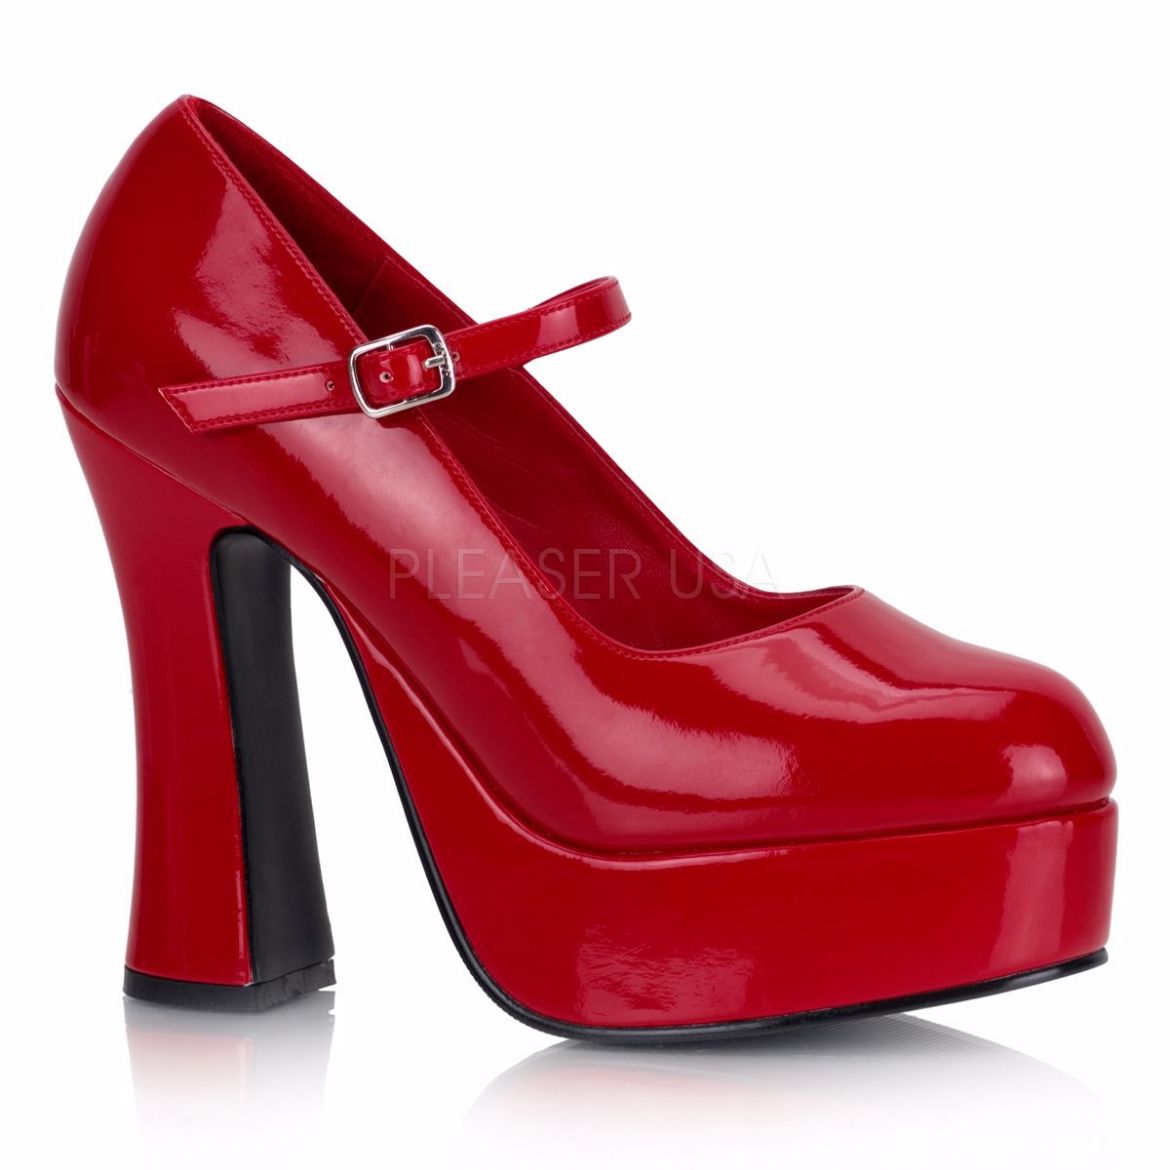 Product image of Demonia Dolly-50 Red Patent, 5 inch (12.7 cm) Heel, 1 1/2 inch (3.8 cm) Platform Court Pump Shoes